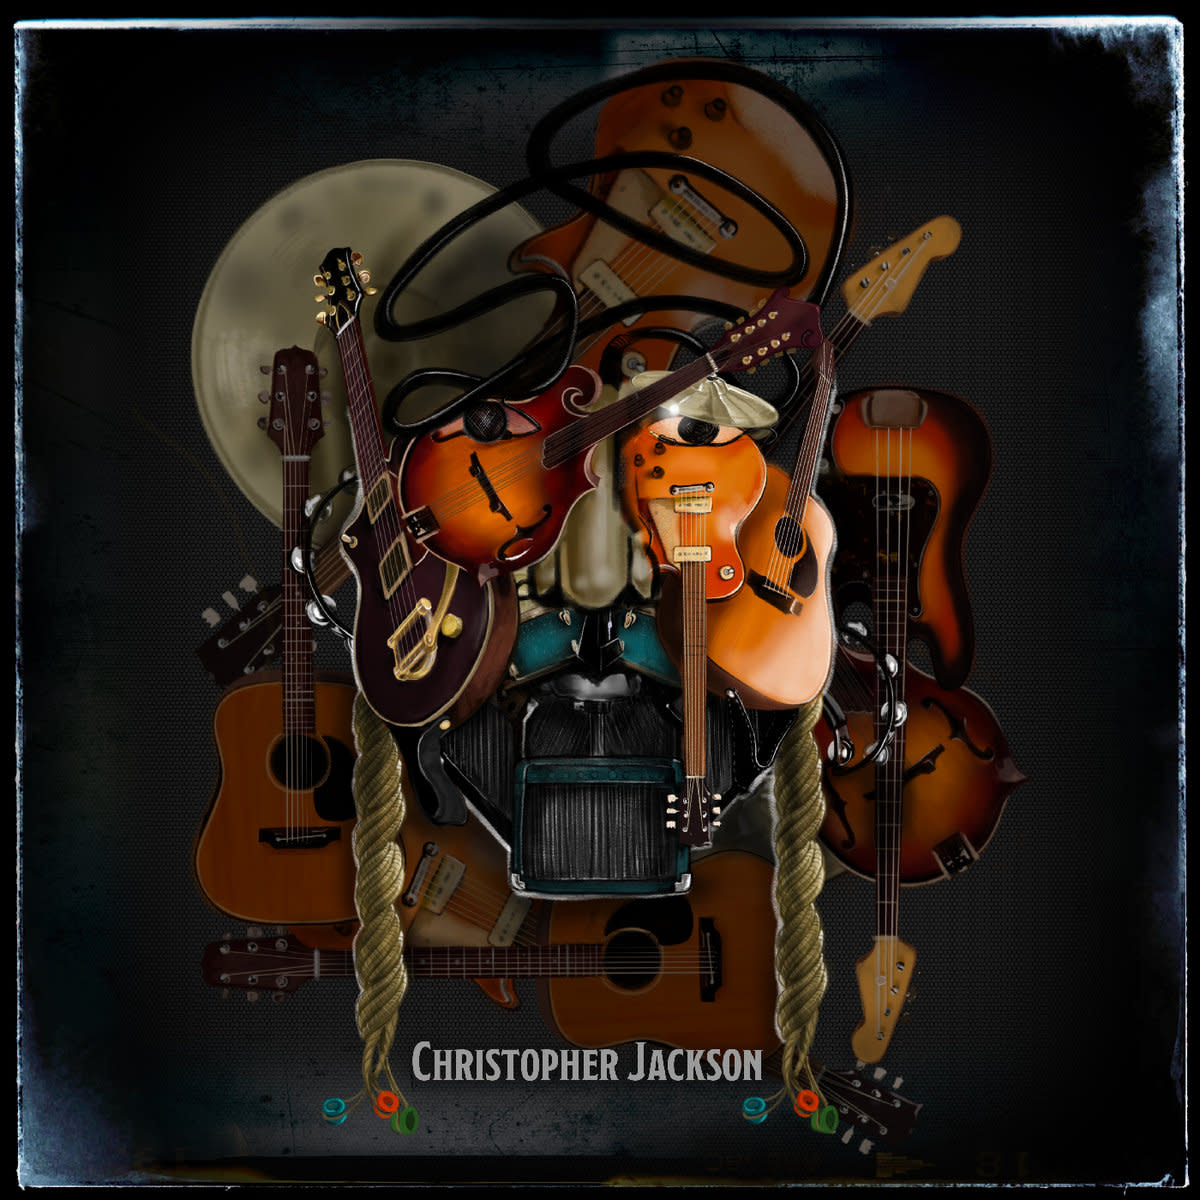 Local Christopher Jackson - S/T